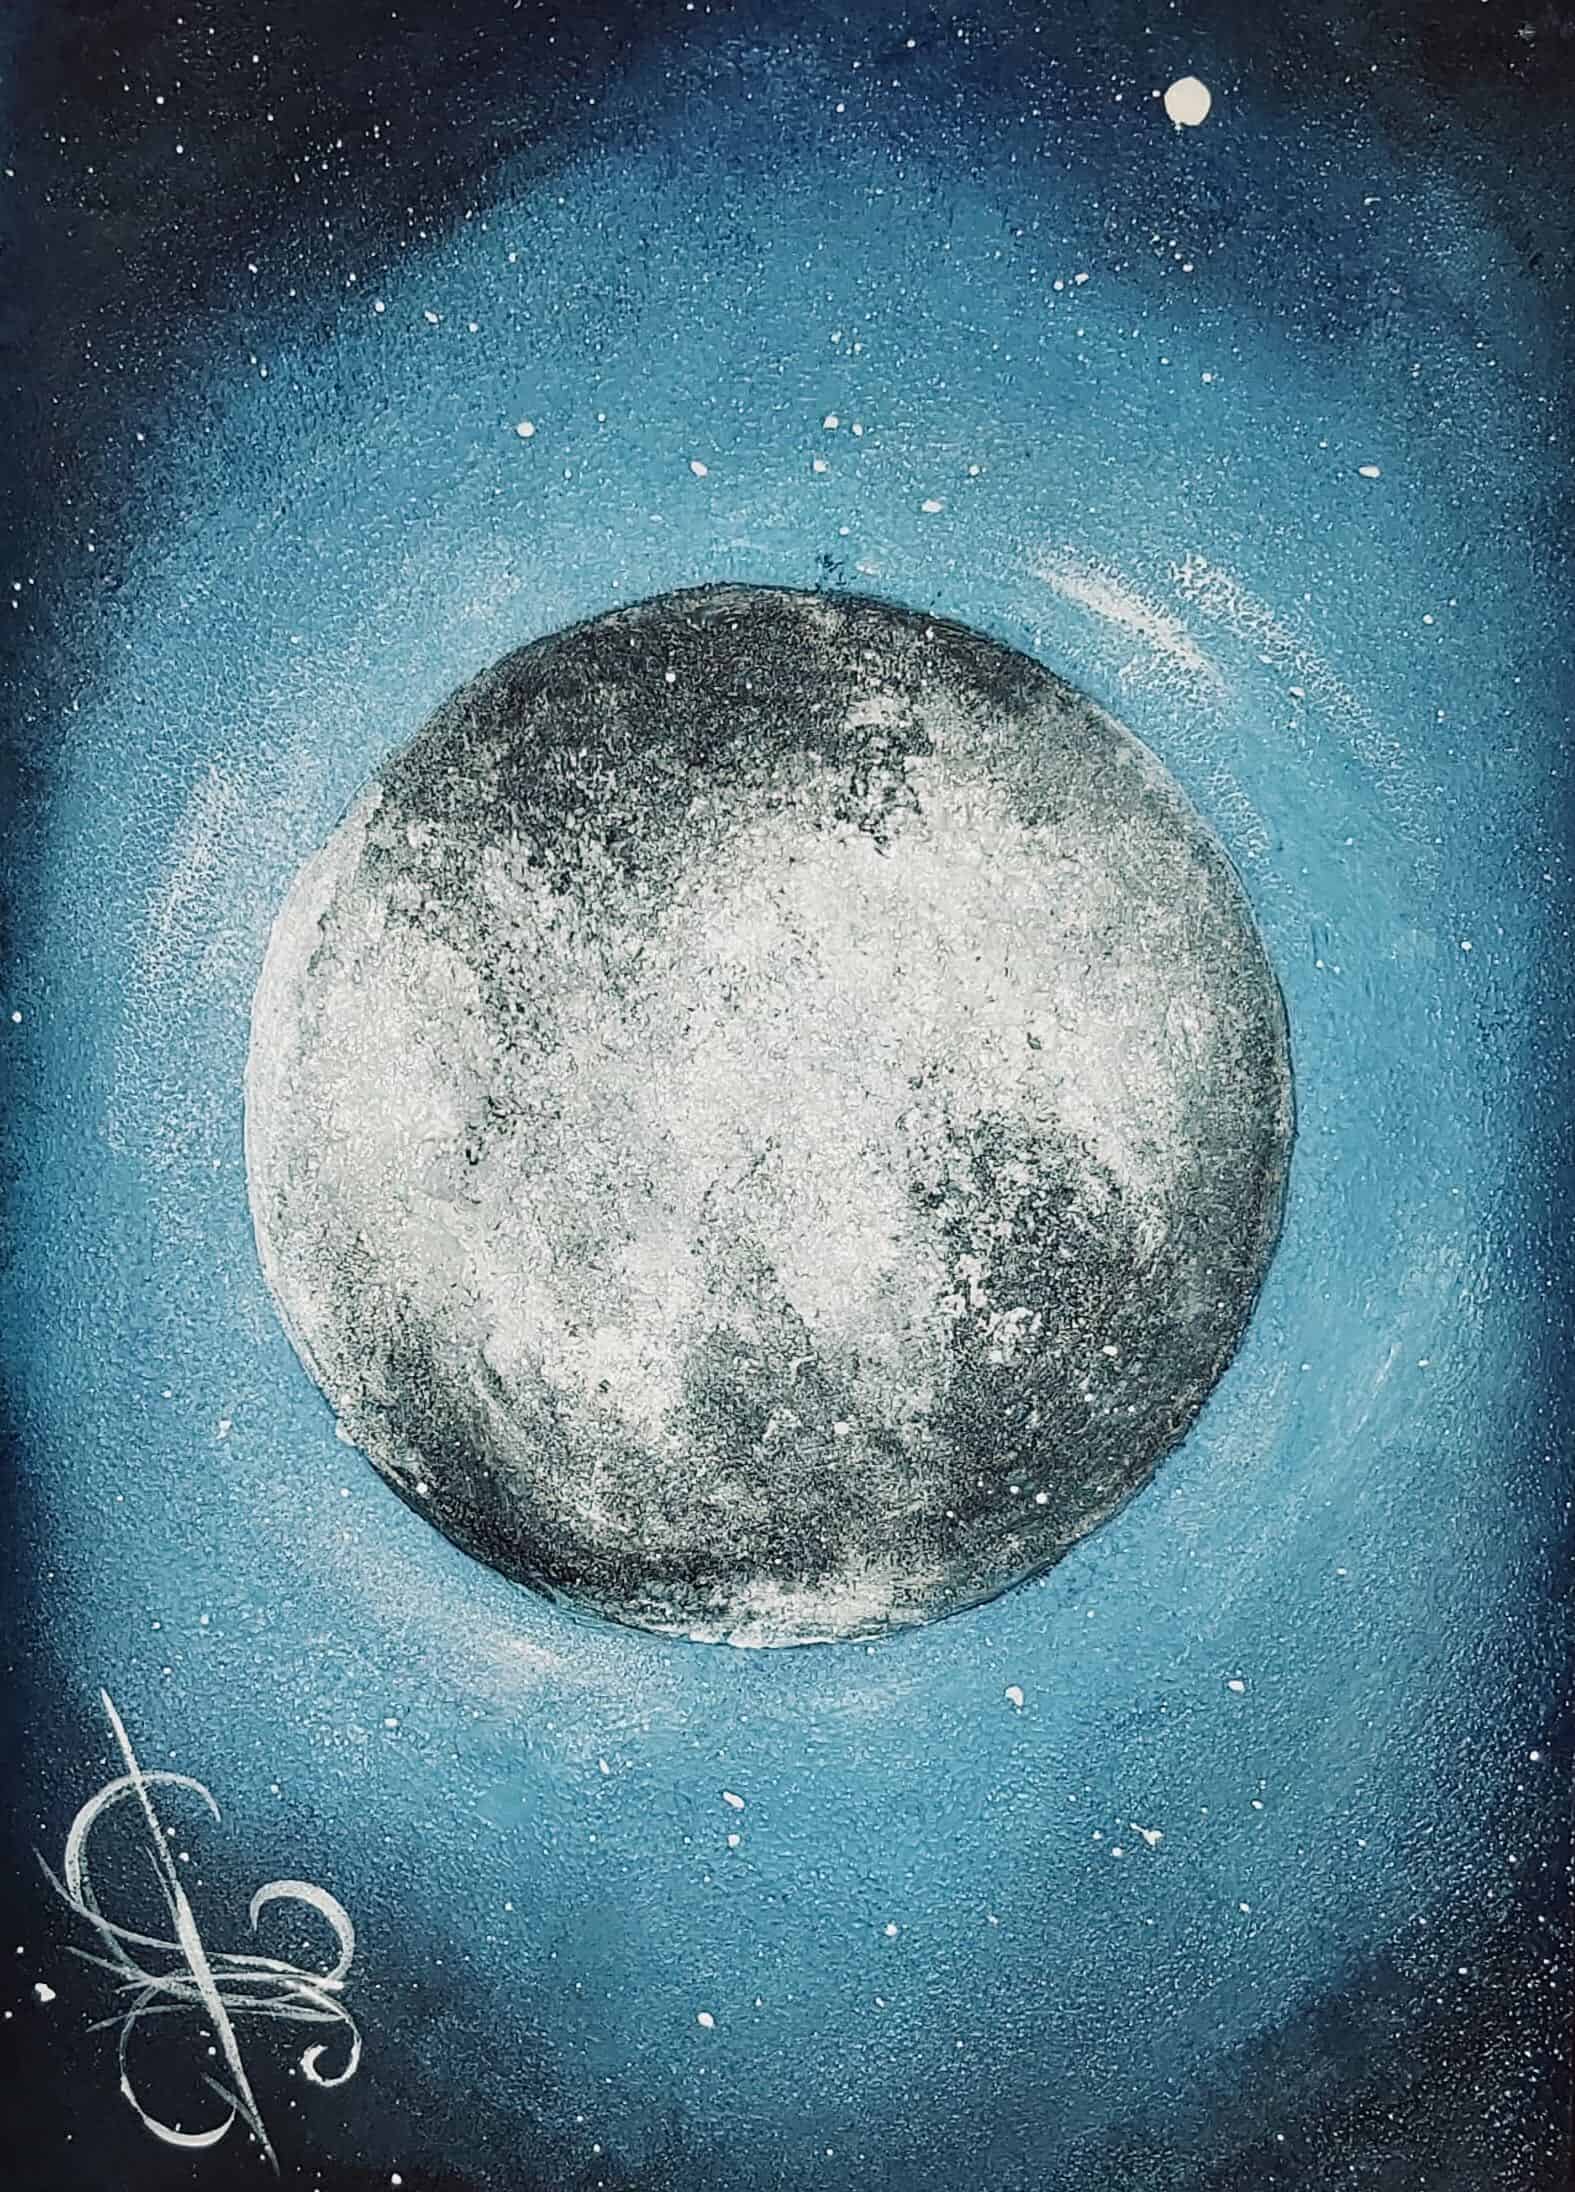 DIY: The painting “A shining moon” by yourself in 7 simple steps